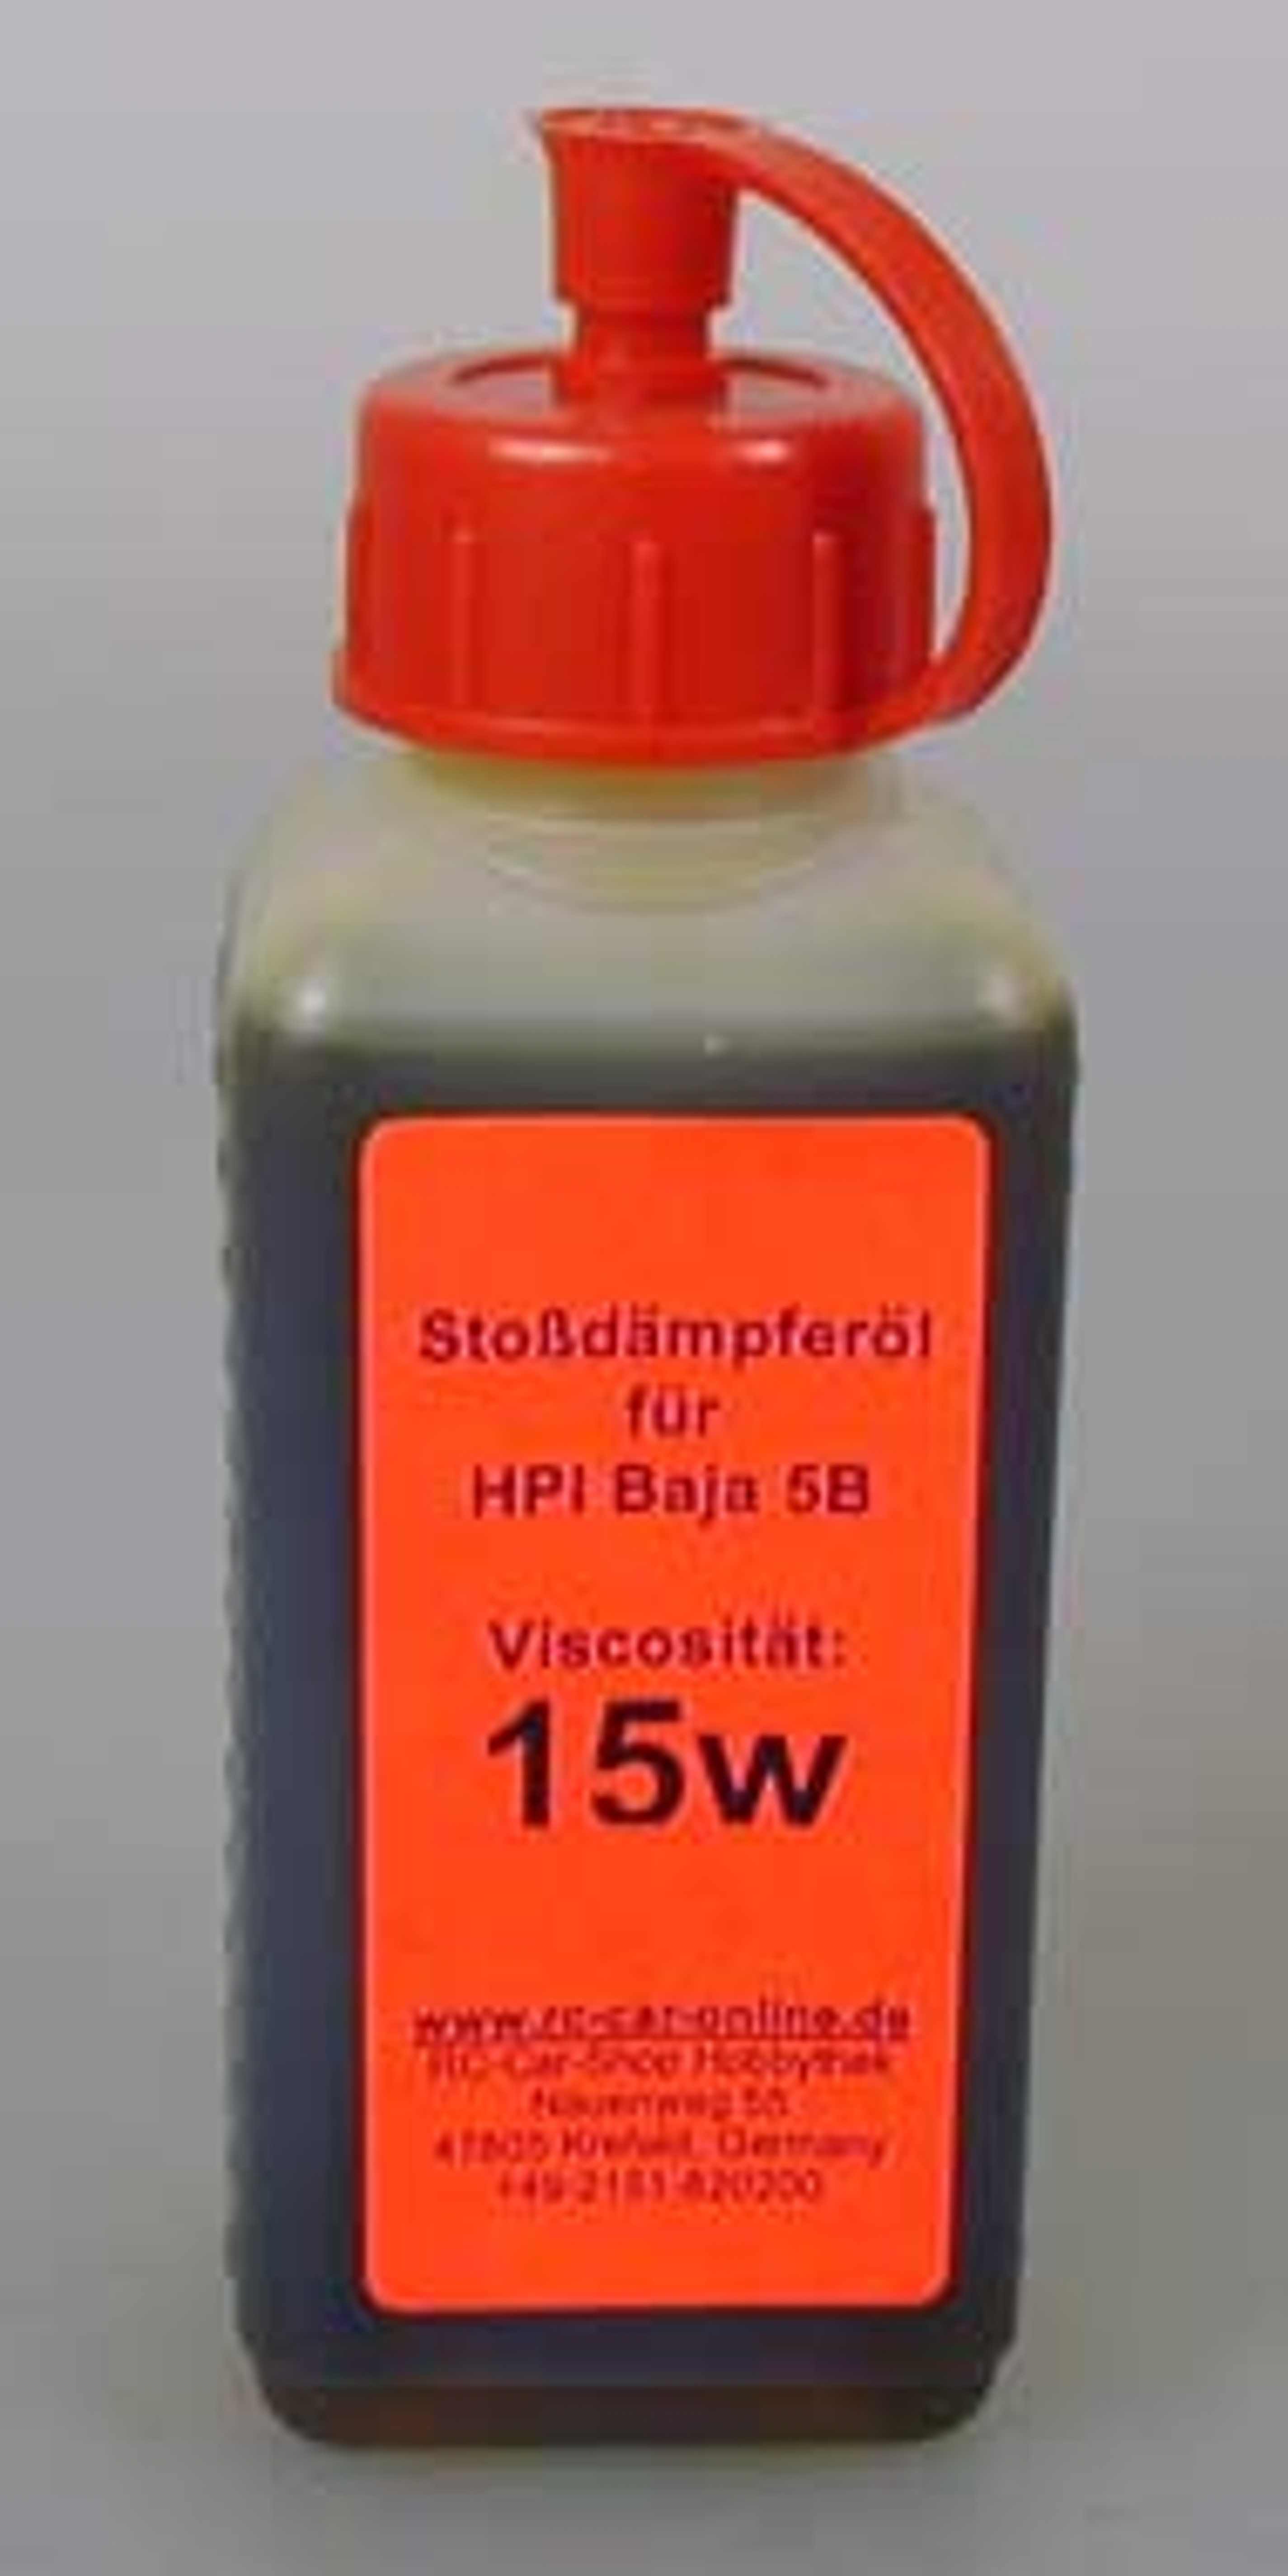 Shock absorber oil 15W for HPI and Mecatech Klick-Shocks, y0058/15, 1 pce.